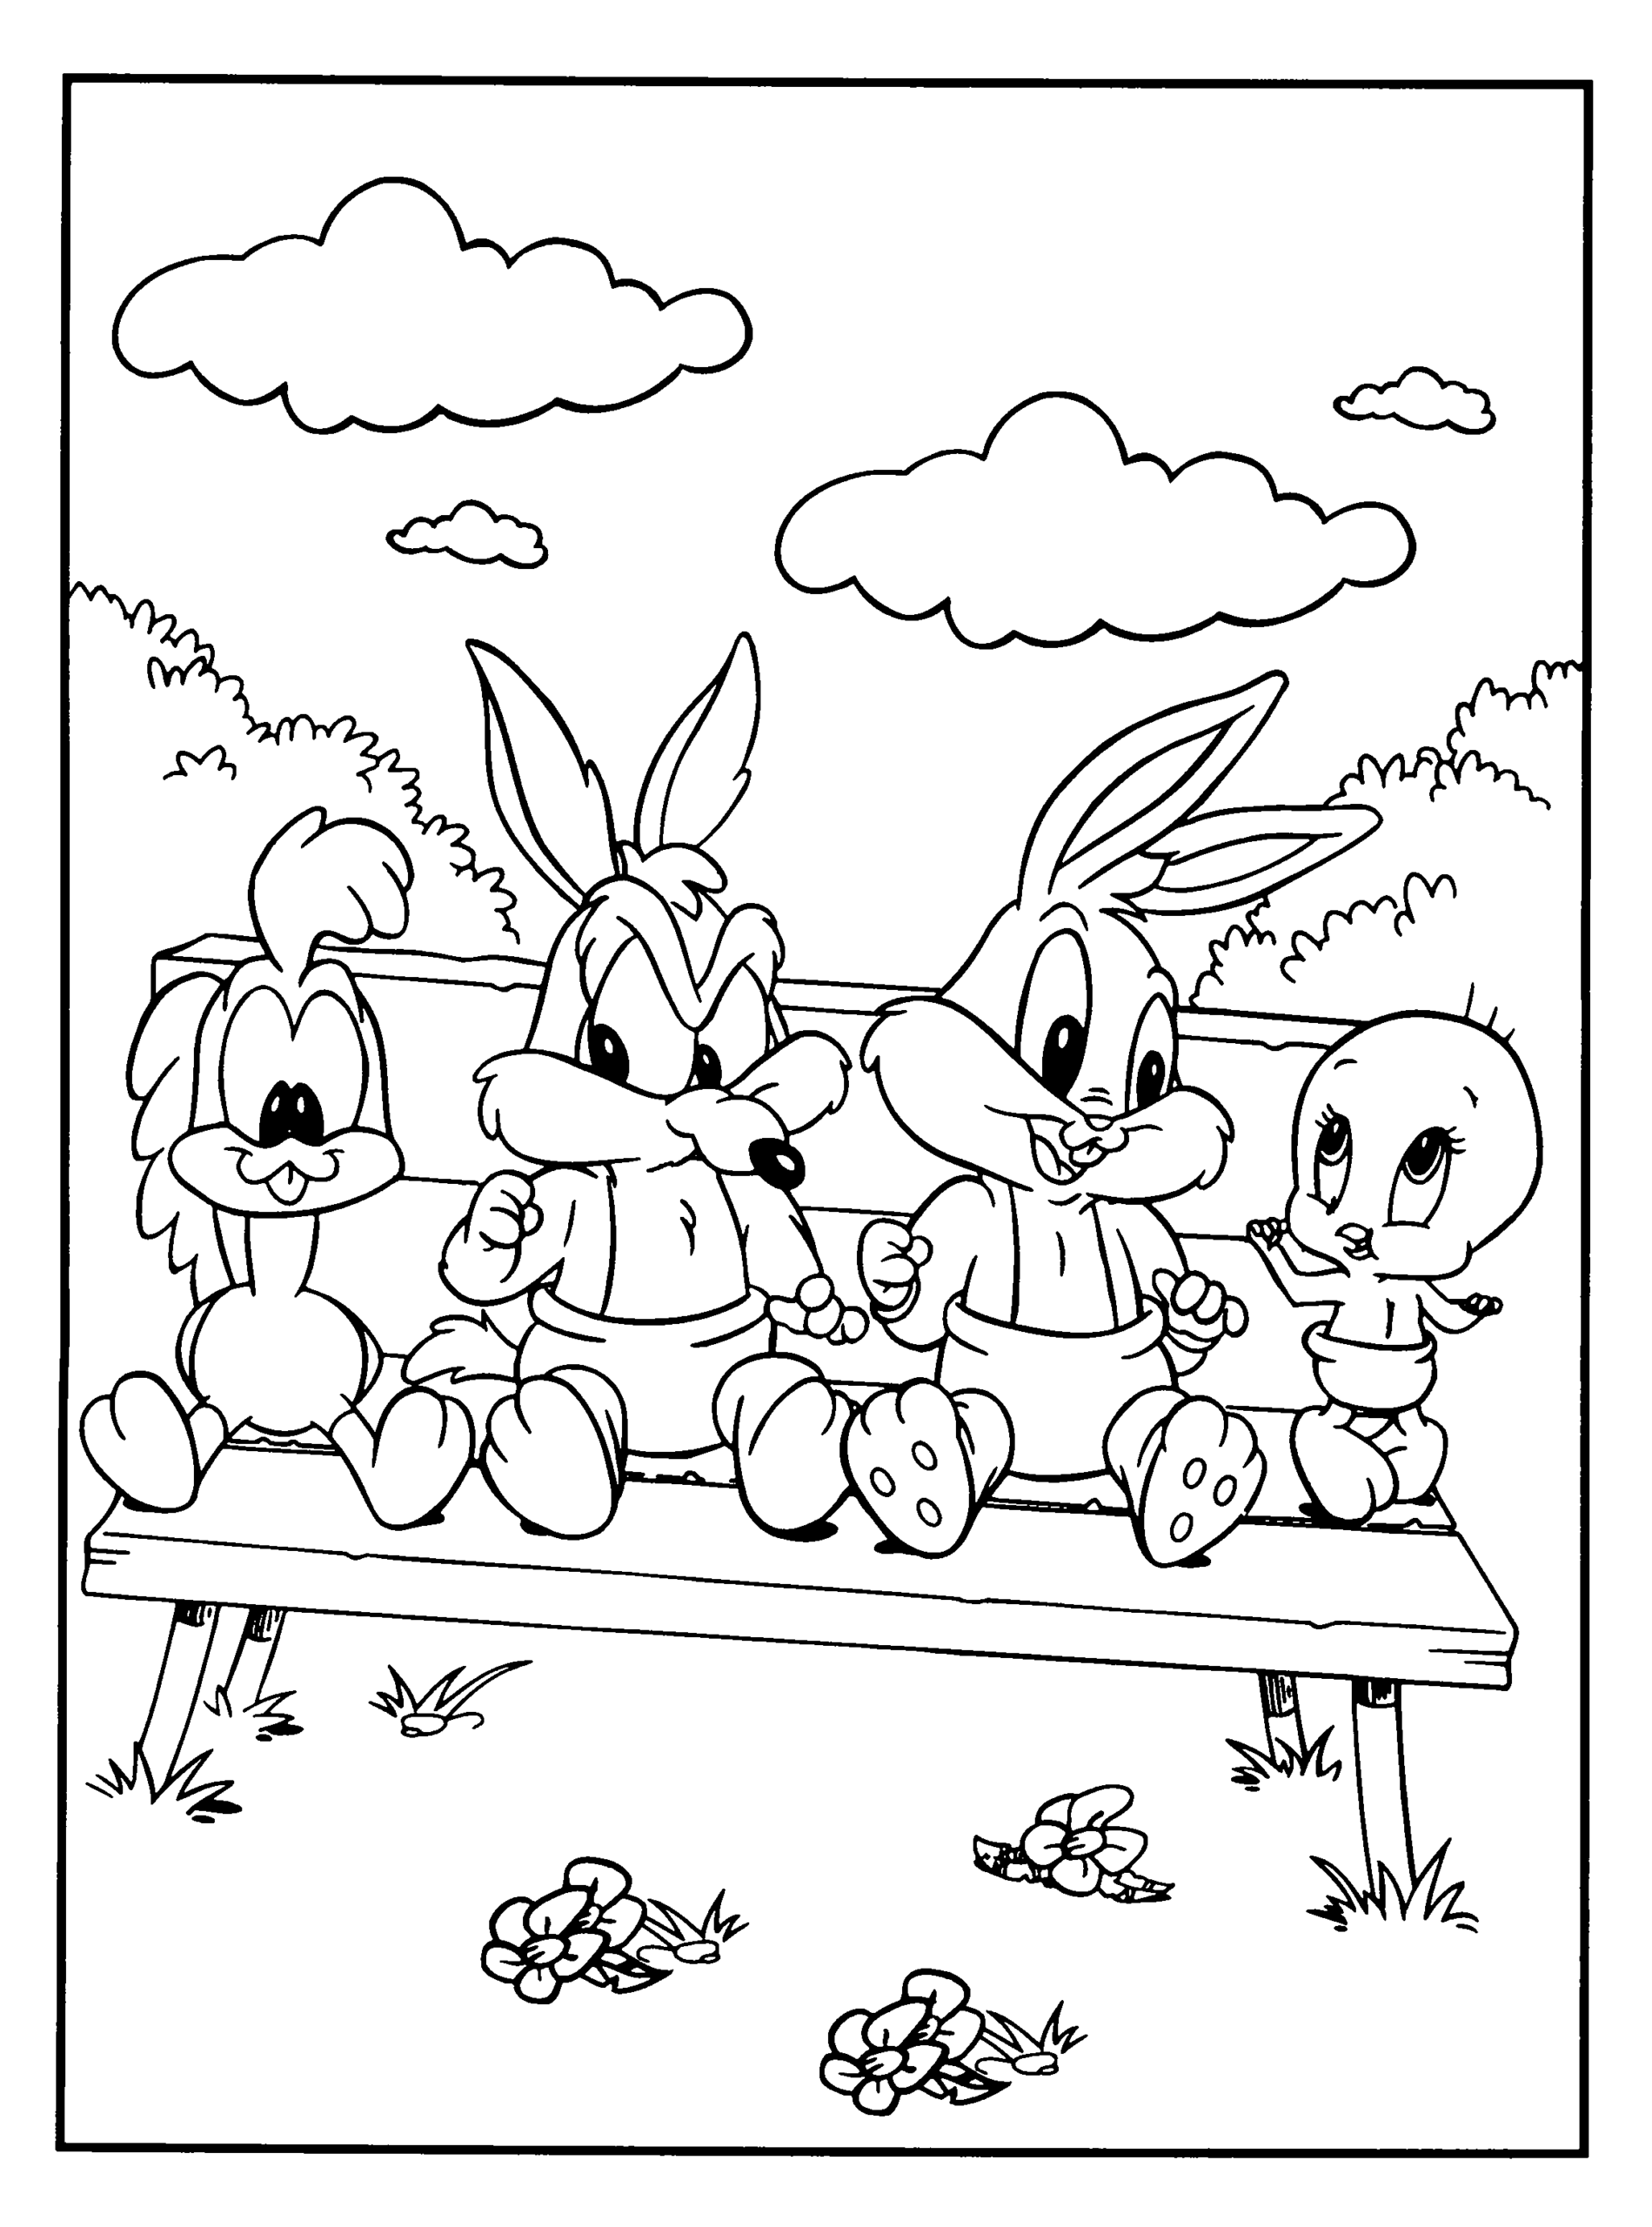 Looney Tunes Coloring Pages TV Film looney tunes 16 Printable 2020 04582 Coloring4free